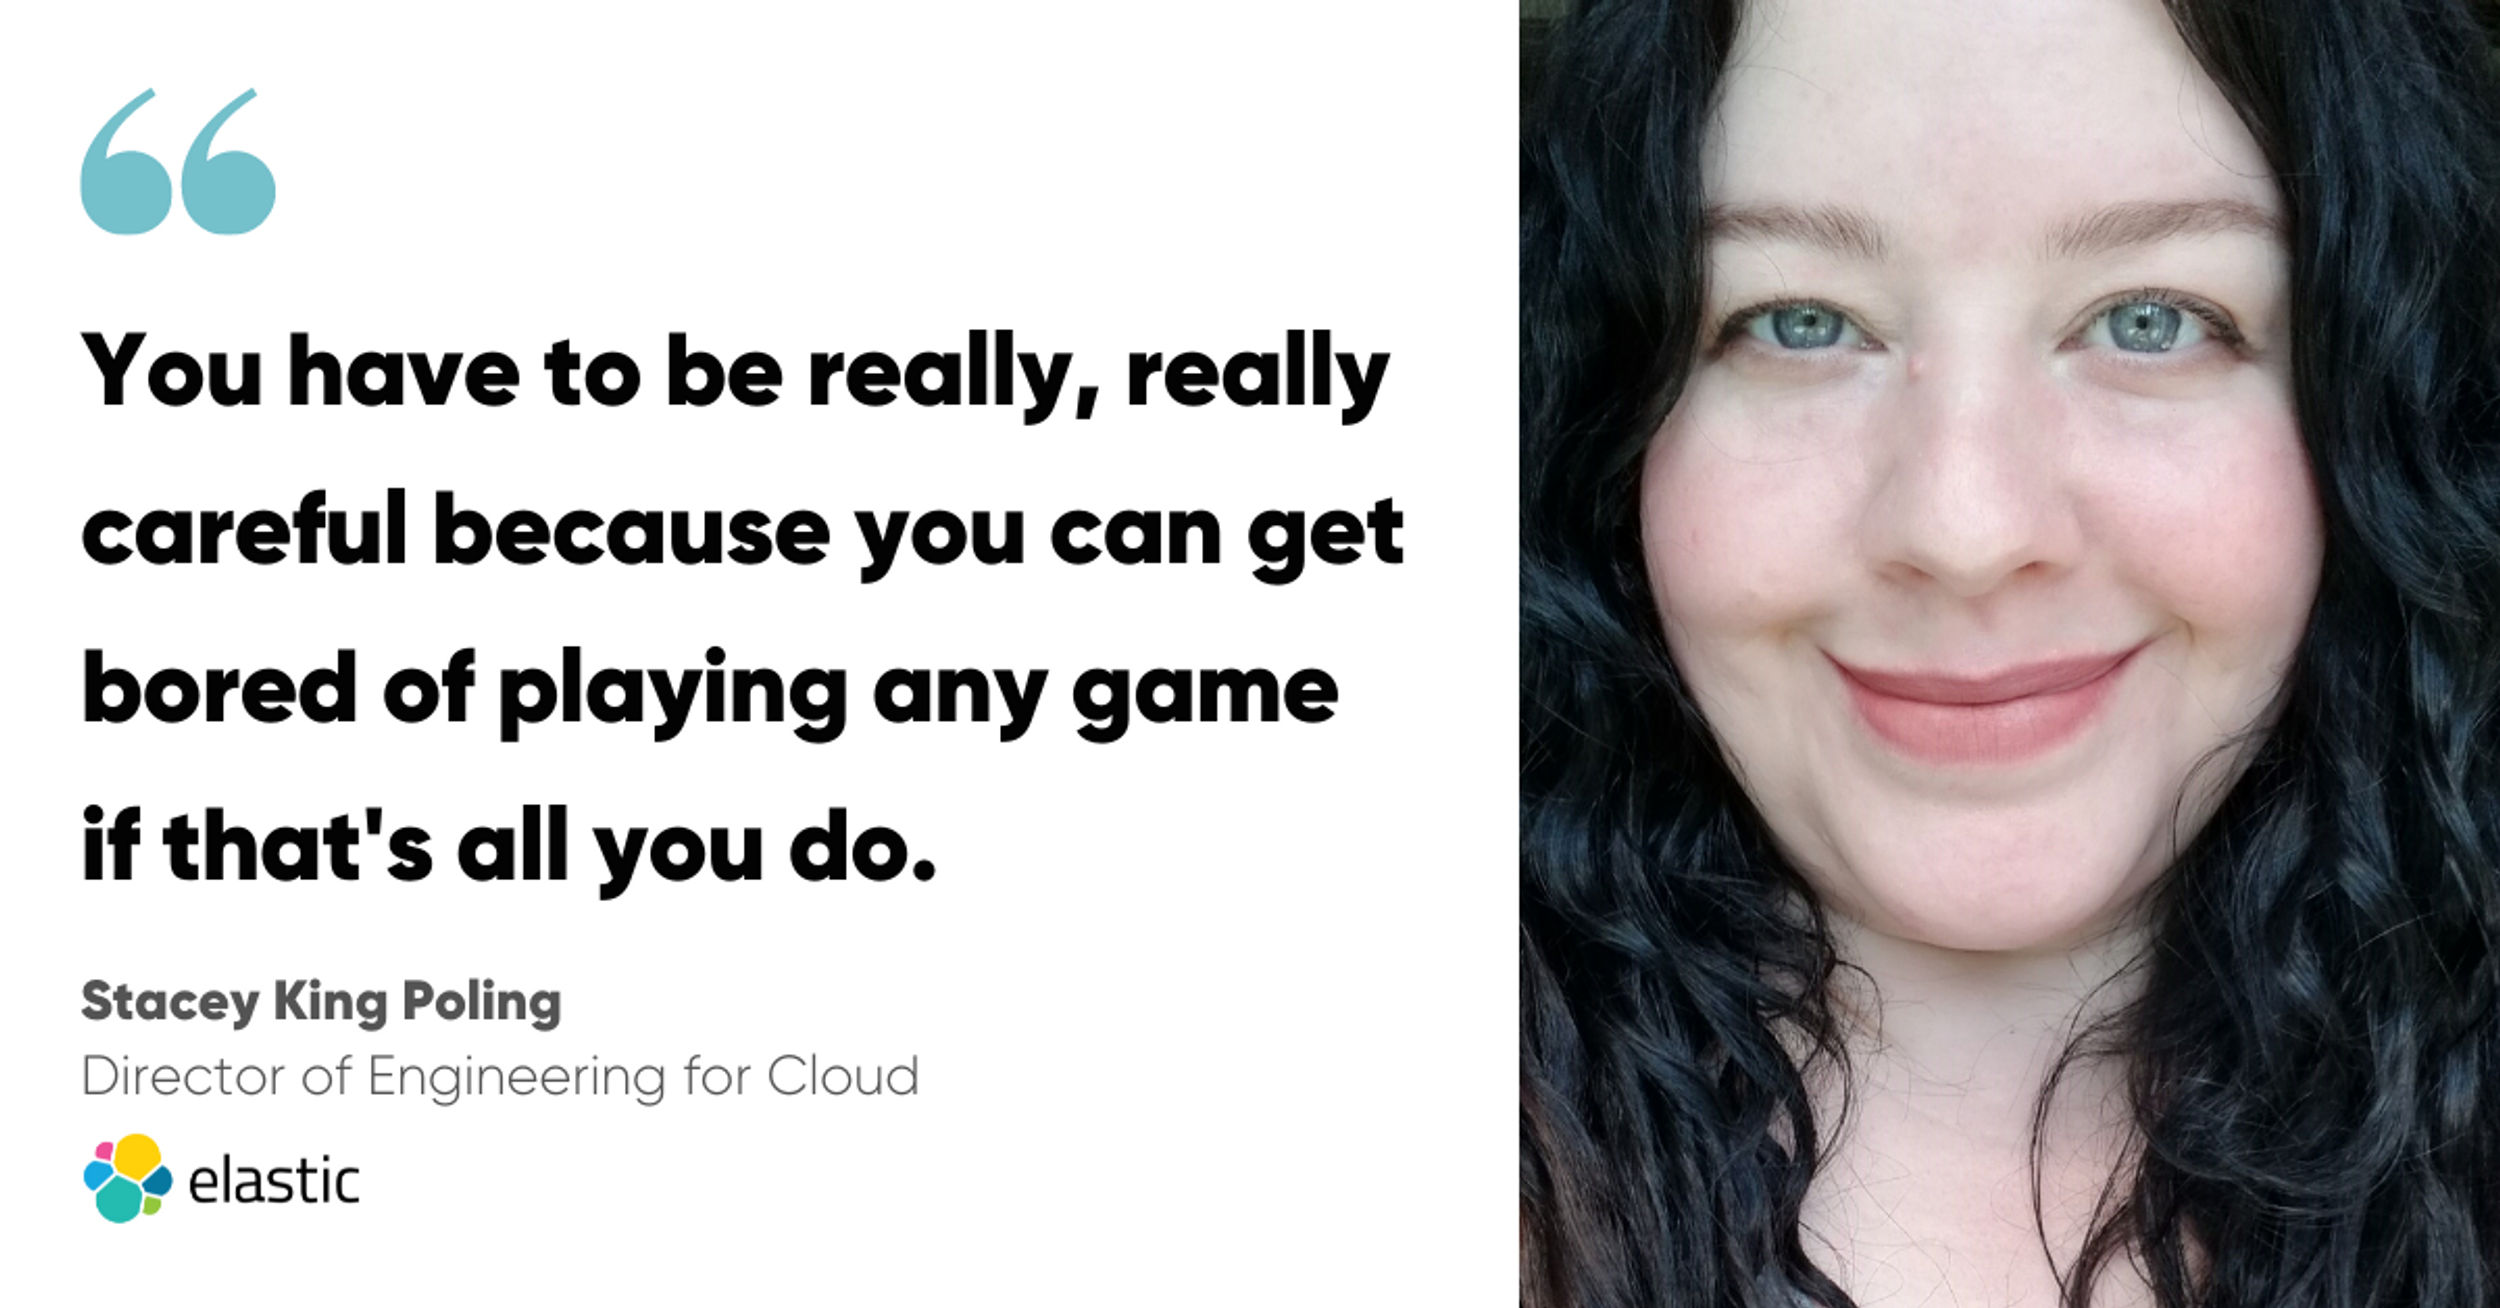 Blog post banner with quote from Stacey King Poling, Director of Engineering for Cloud at Elastic